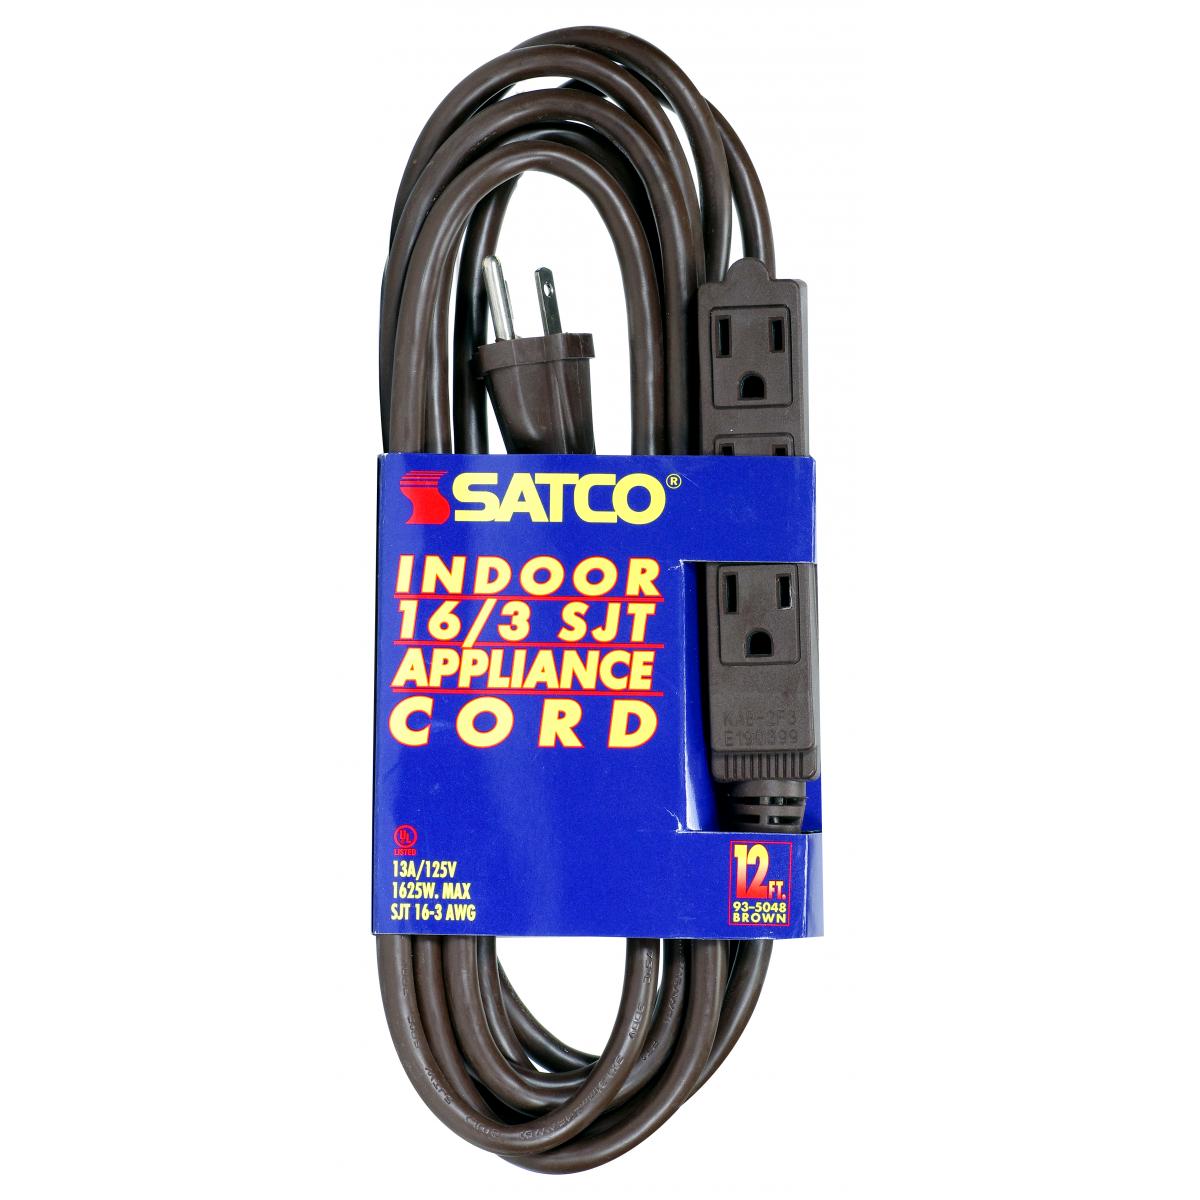 Satco 93-5048 12 Foot Extension Cord Brown Finish 16/3 SJT Indoor Only 13A-125V-1625W Rating